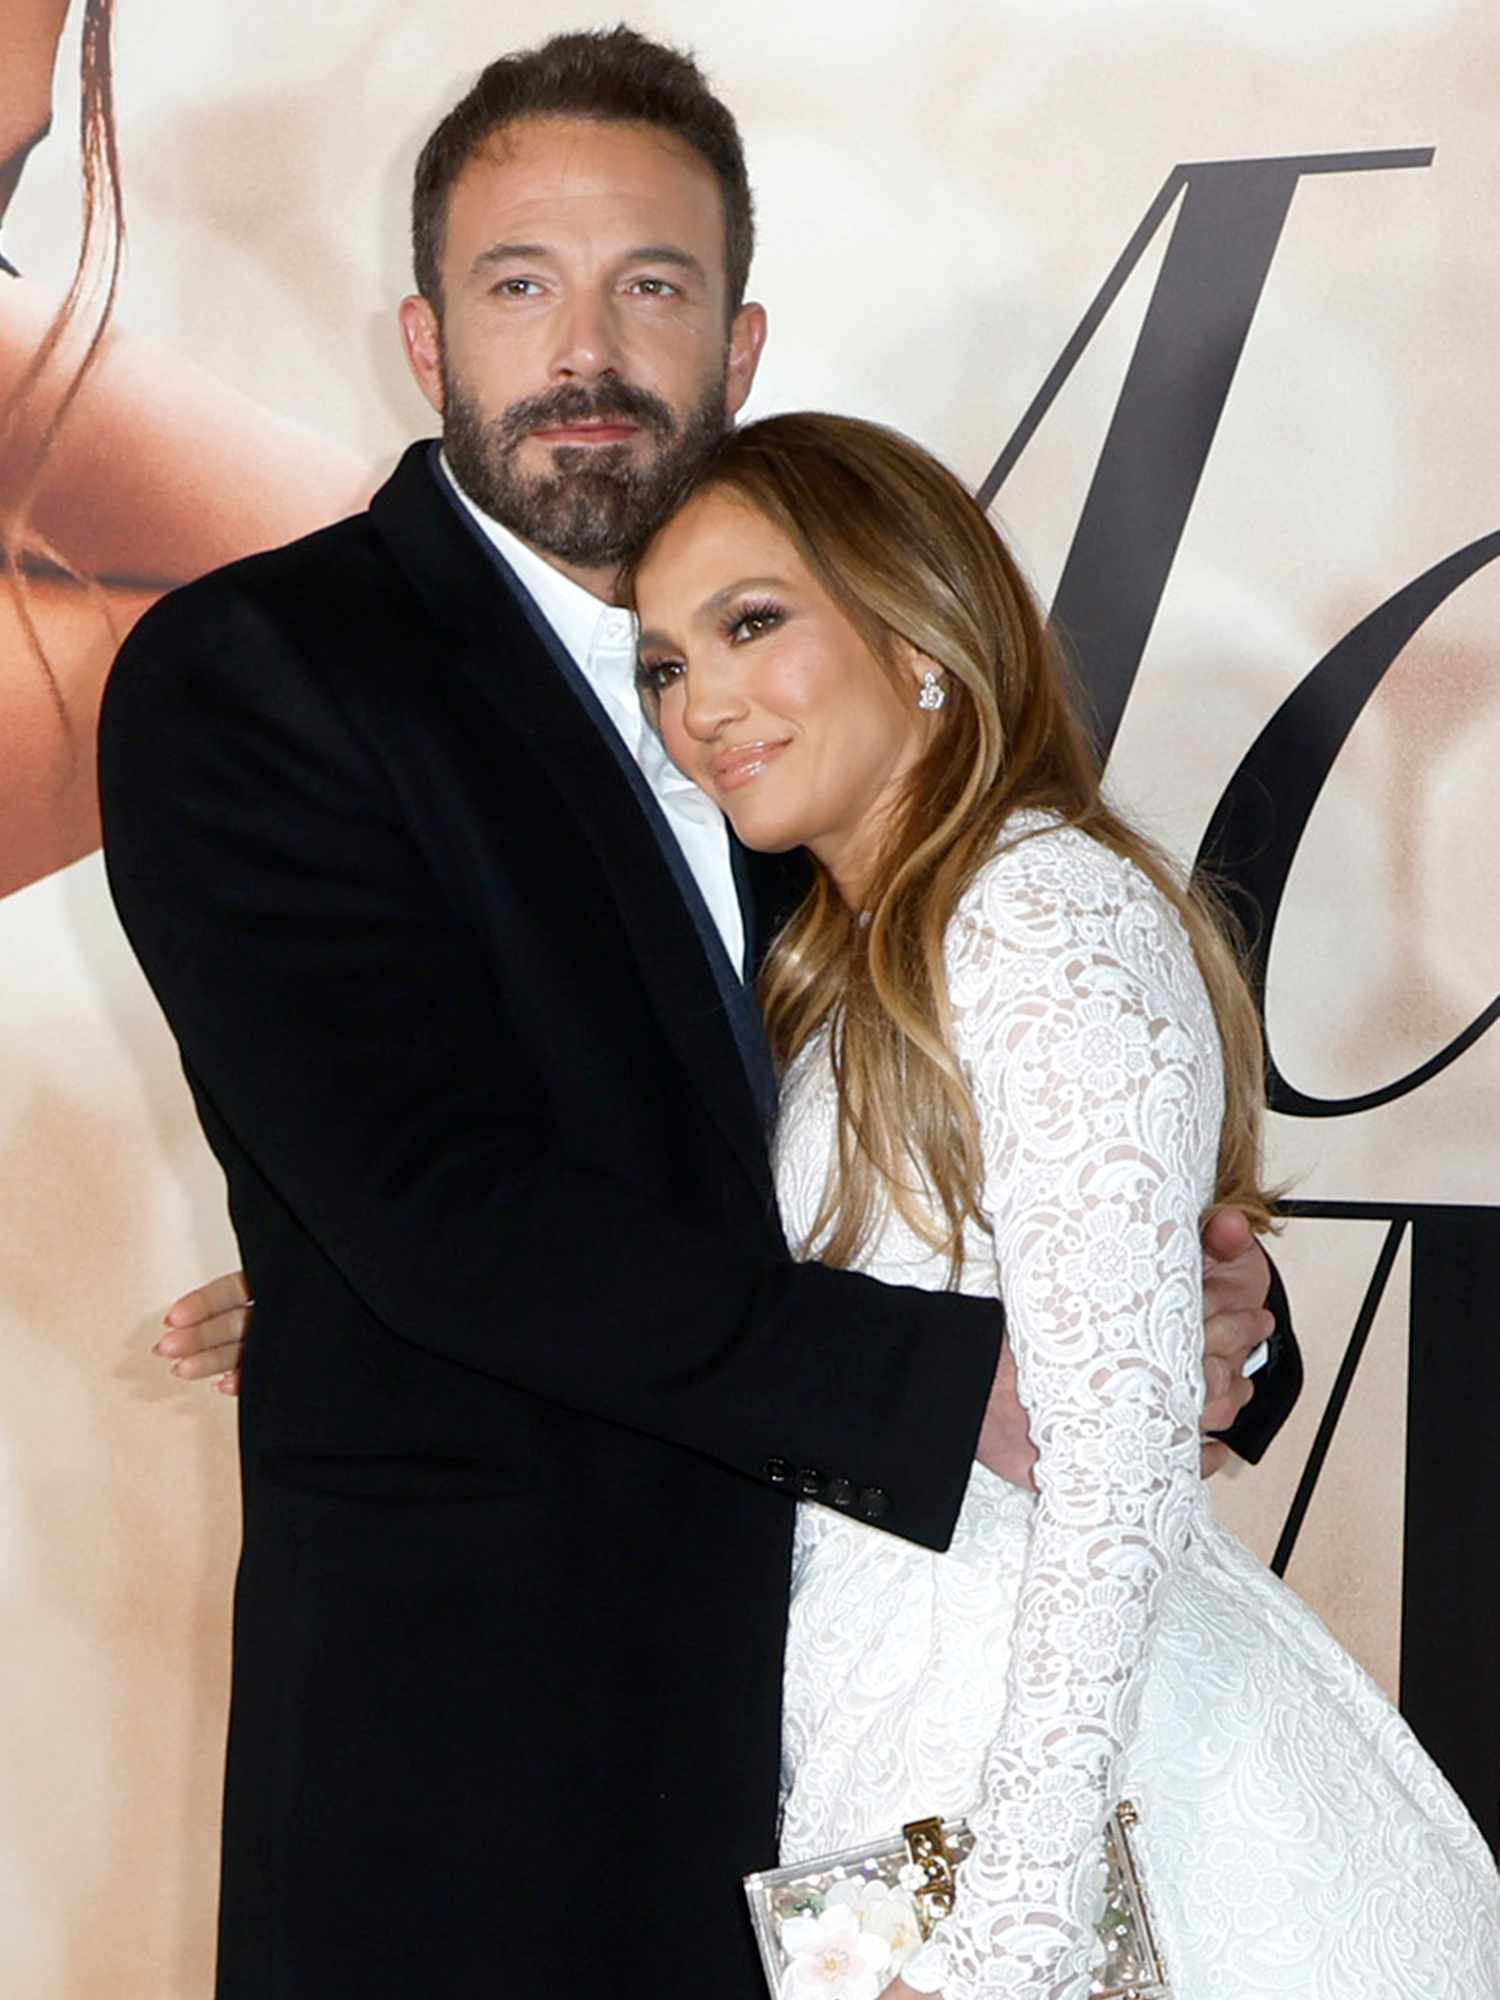 Ben Affleck and Jennifer Lopez at the Los Angeles Special Screening Of "Marry Me" on February 08, 2022 in Los Angeles, California.